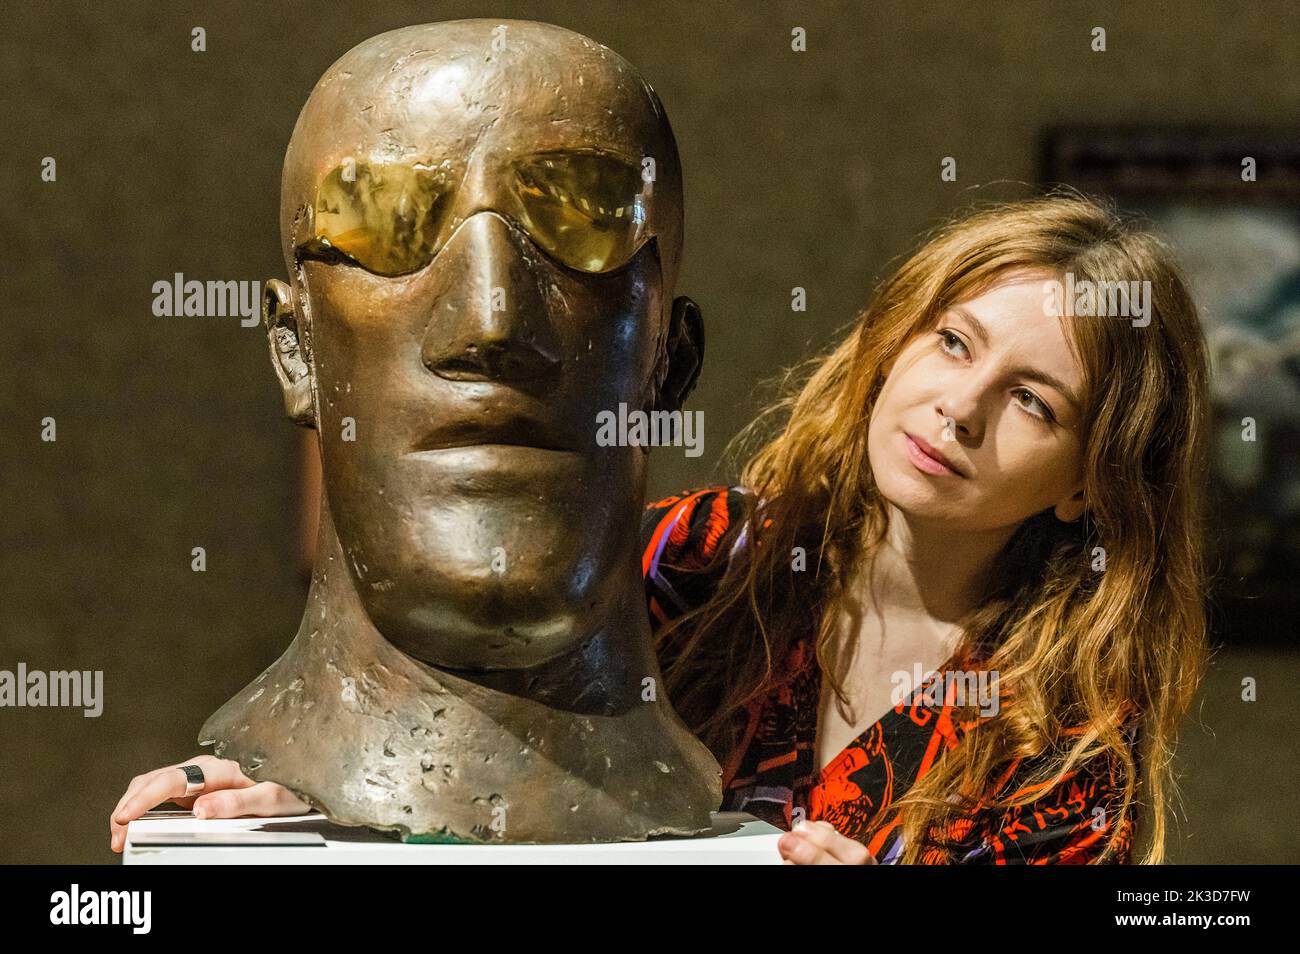 London, UK. 26th Sep, 2022. Head by Elisabeth Frink, estimated at £70,000-100,000 - The Blazing a Trail: Modern British Women sale at Bonhams New Bond Street. The aim of which is to introduce collectors to the wealth of British 20th century women artists. The sale itself will take place on 28 September in London Credit: Guy Bell/Alamy Live News Stock Photo